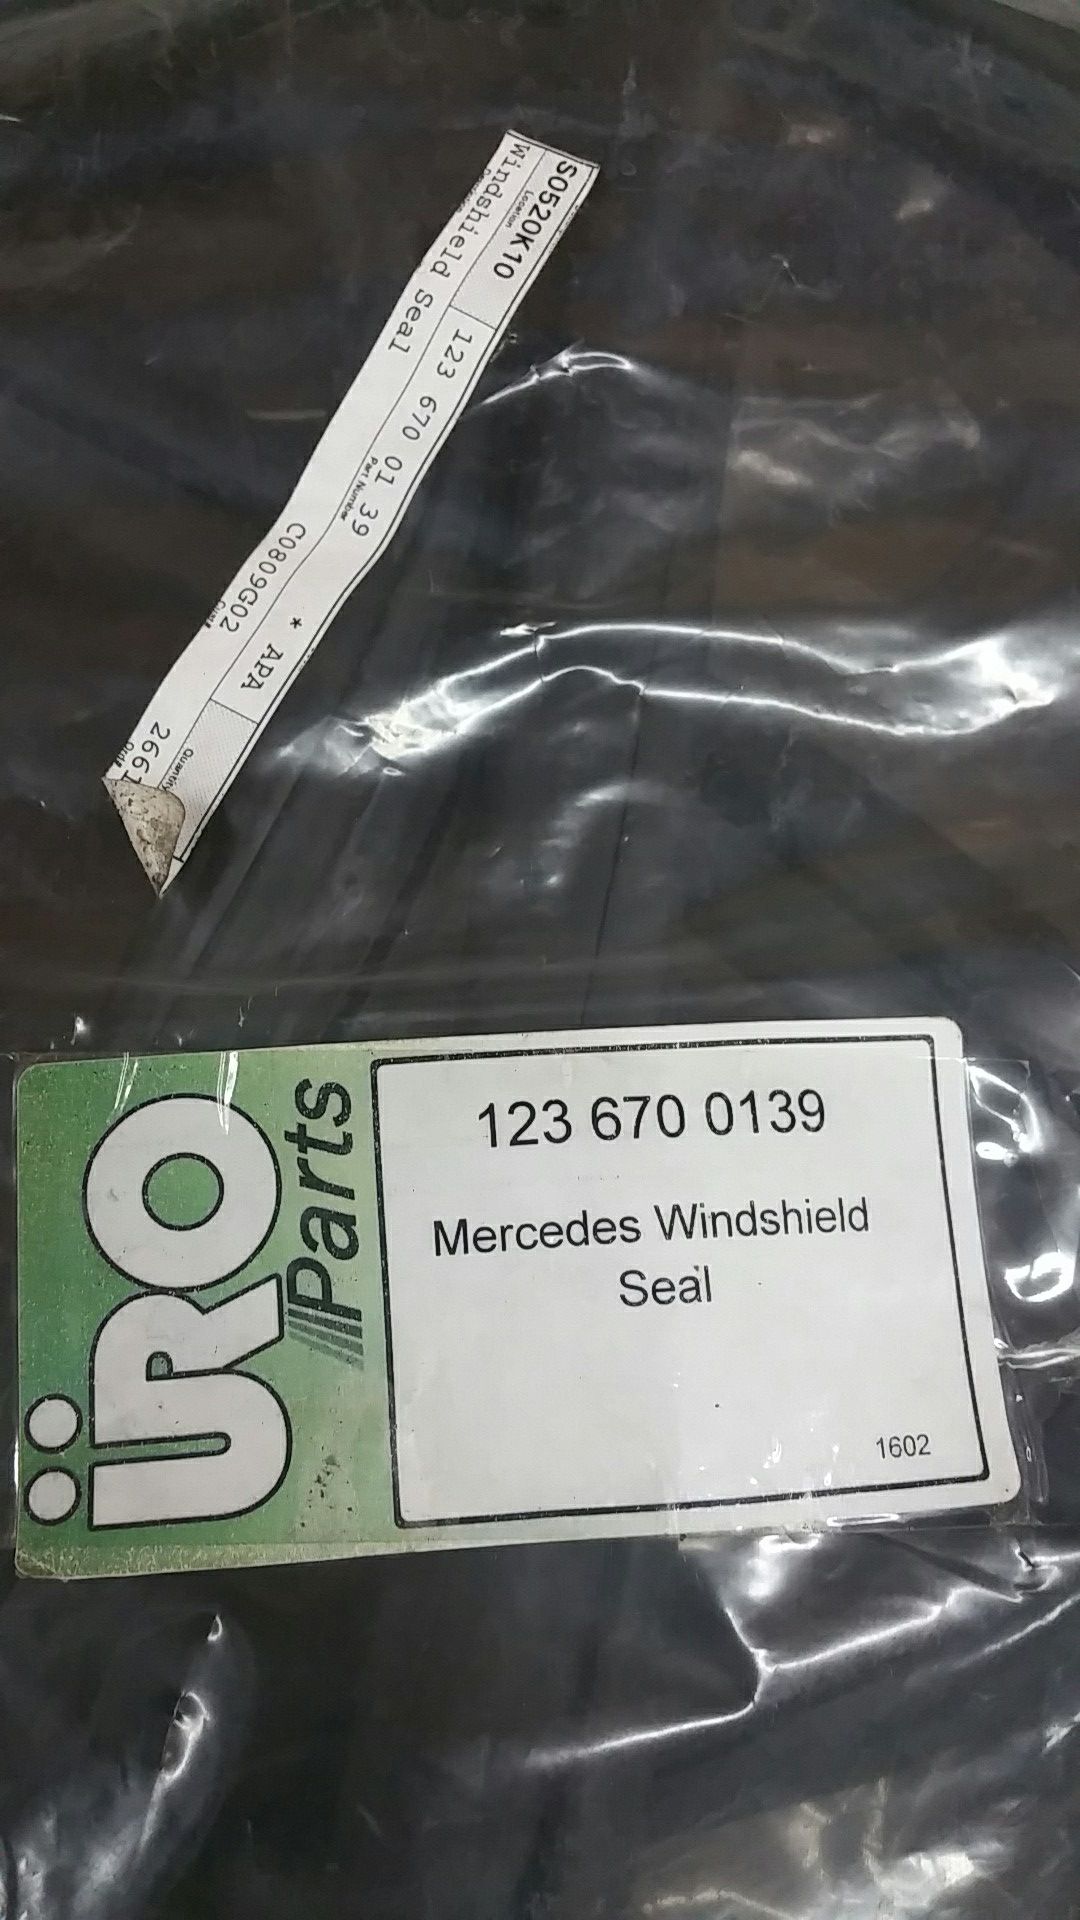 Mercedes front winshield seal brand new